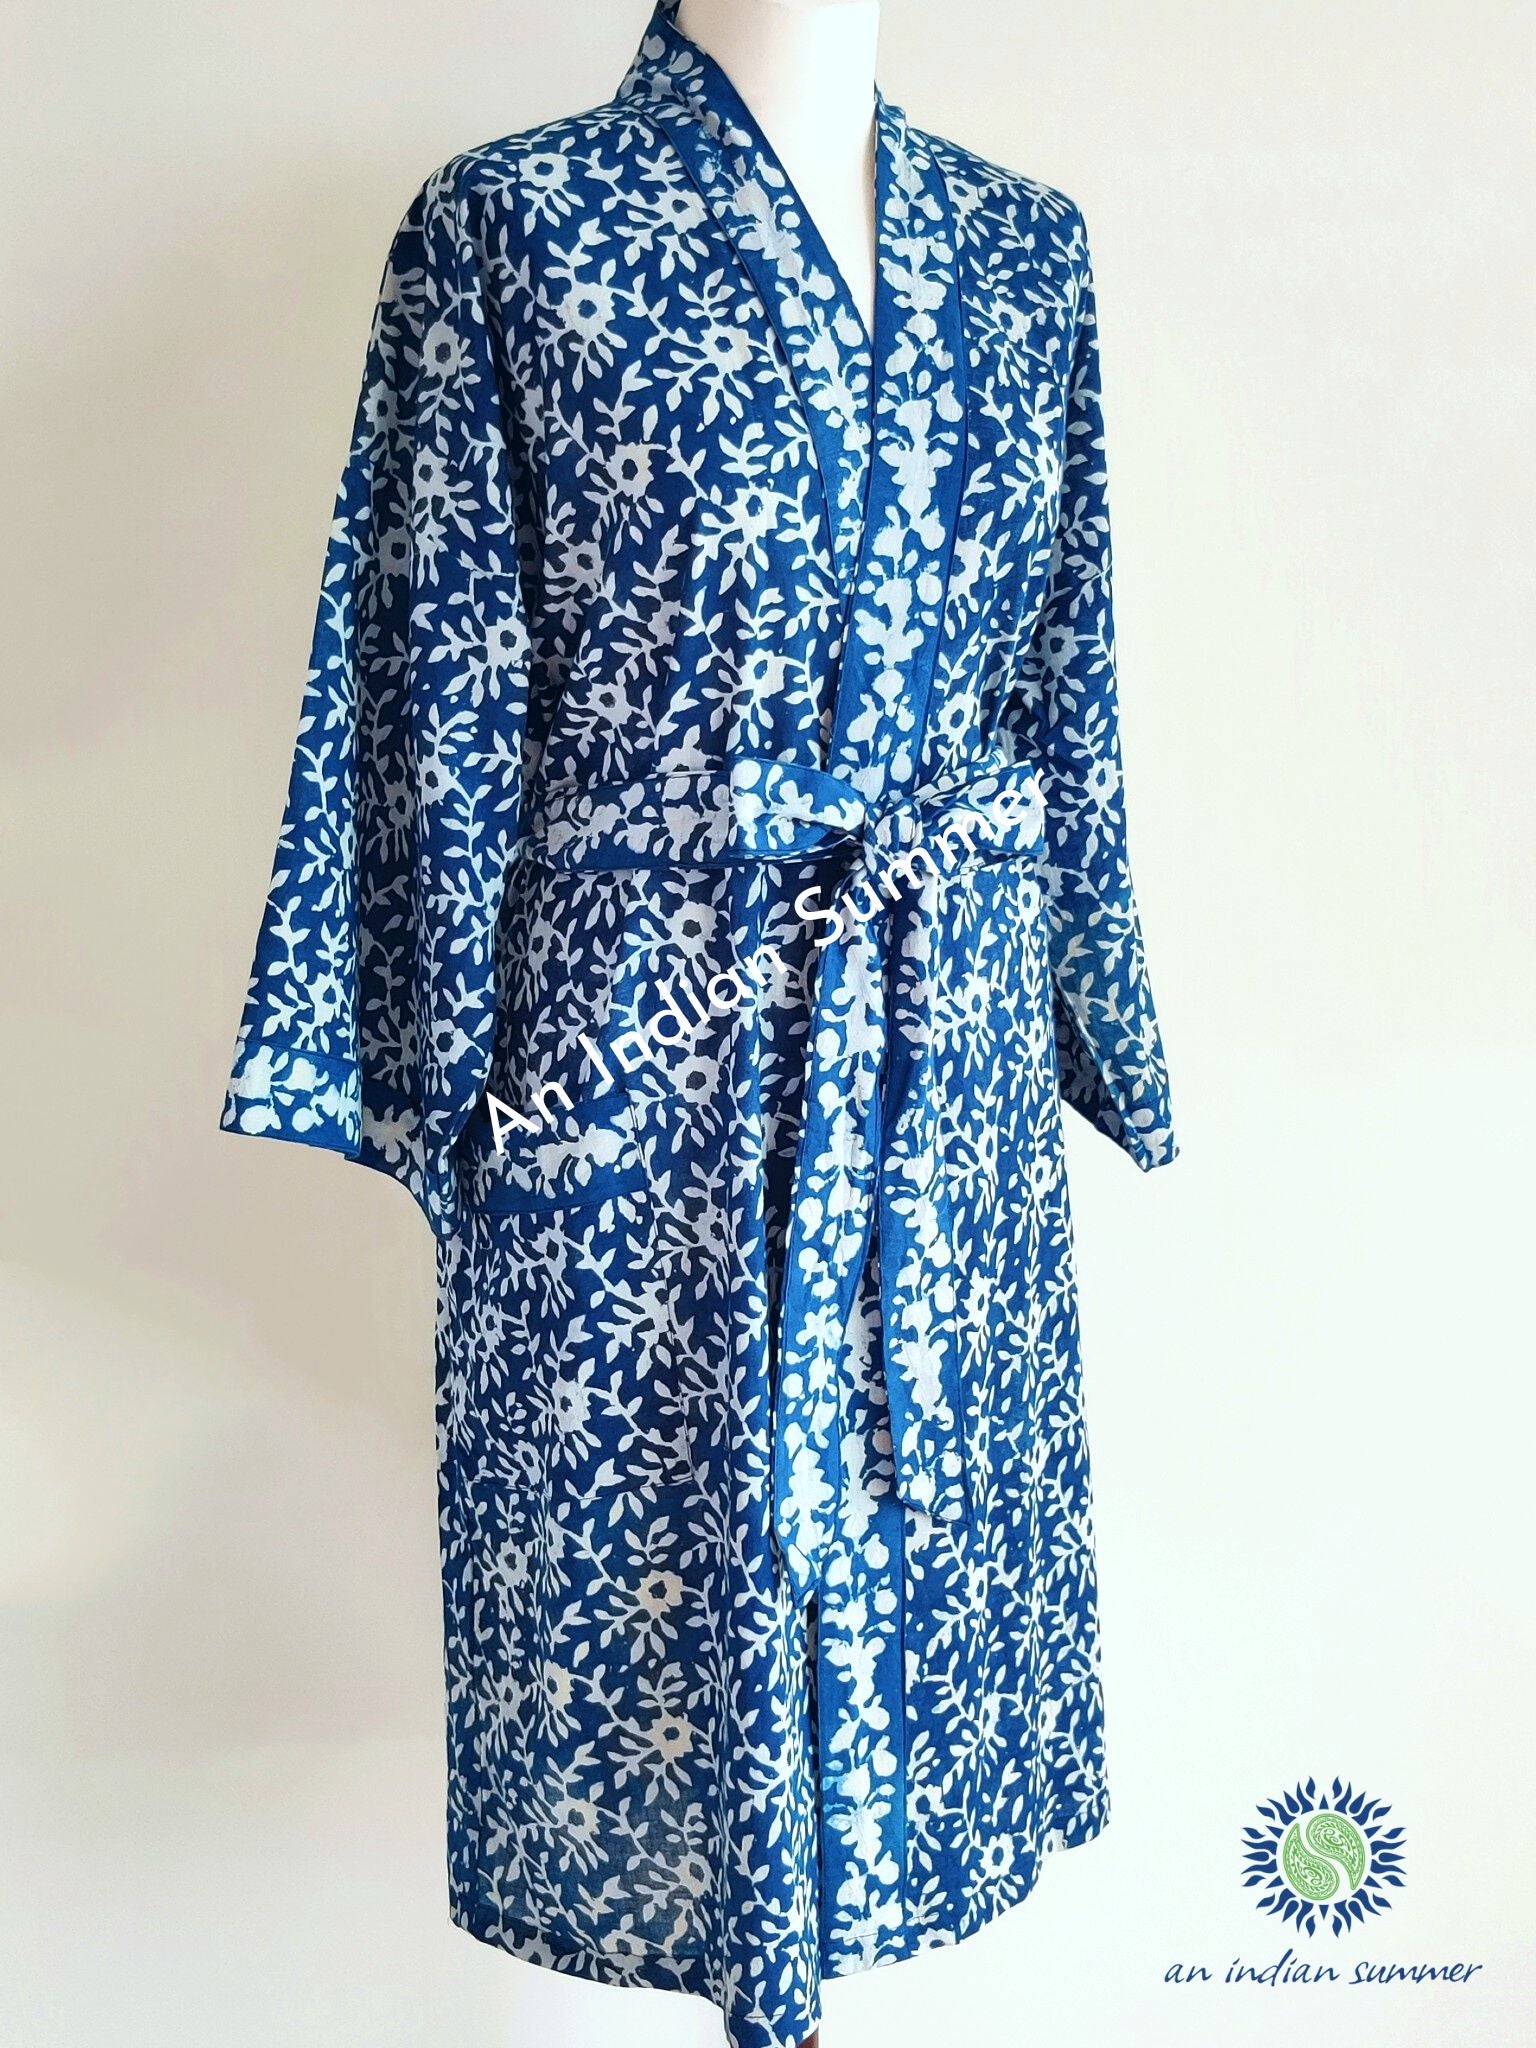 Short Kimono Robe | Natural Indigo Dyed Plant Dye | Floral Design Block Print | Hand Block Printed | Cotton Voile | An Indian Summer | Seasonless Timeless Sustainable Ethical Authentic Artisan Conscious Clothing Lifestyle Brand